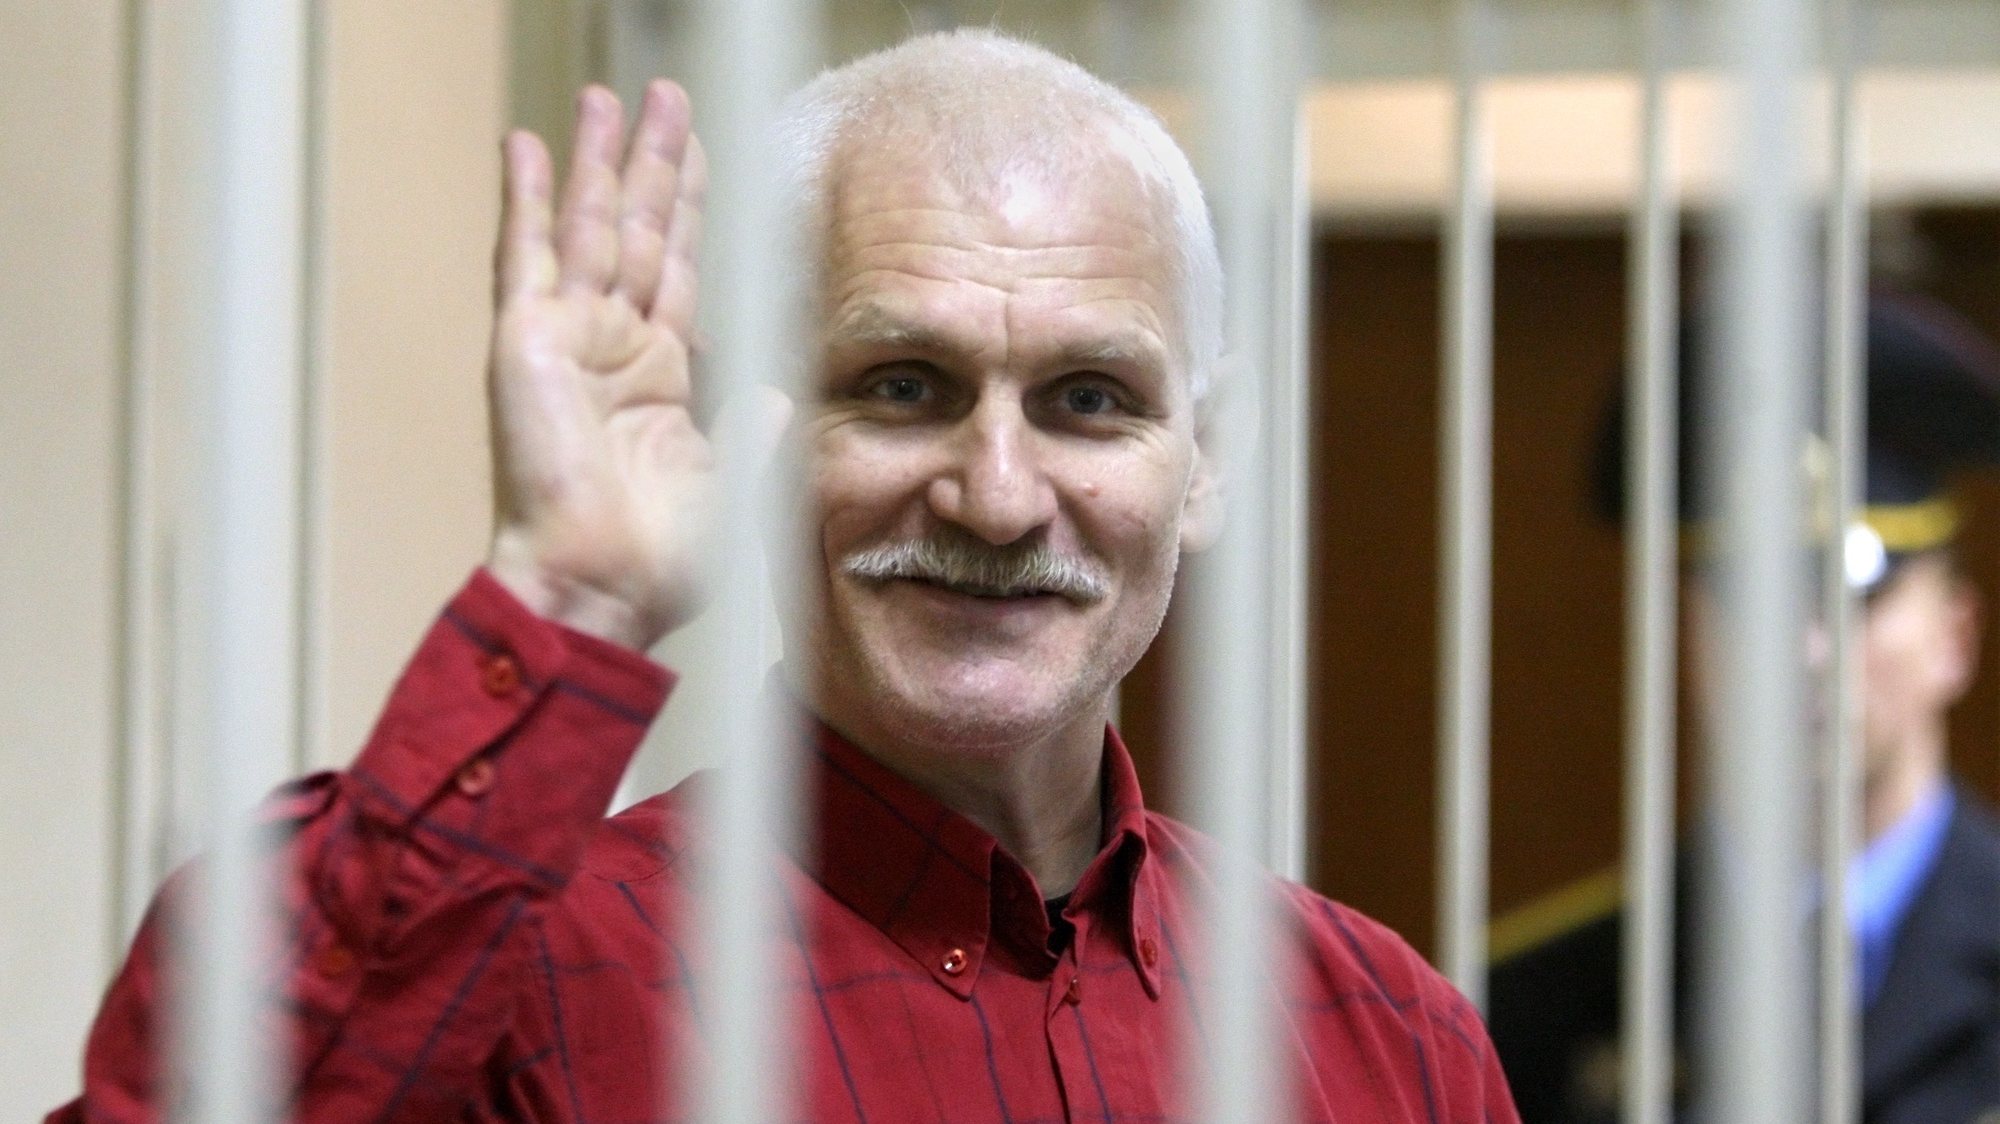 epa10228762 (FILE) - Belarusian human rights activist Ales Bialiatski (also transliterated as Alex Belyatsky), leader of Viasna, a human rights group based in Minsk, waves as he waits in a trial cage inside a courtroom prior to a court session in Minsk, Belarus, 24 November 2011 (reissued 07 October 2022). The Nobel Peace Prize 2022 has been awarded to human rights advocate Ales Bialiatski from Belarus, the Russian human rights organization Memorial and the Ukrainian human rights organization Center for Civil Liberties. The Norwegian Nobel Committee said in a statement that by awarding the Nobel Peace Prize for 2022 to Bialiatski, Memorial and the Center for Civil Liberties, it wishes to &#039;honour three outstanding champions of human rights, democracy and peaceful co-existence in the neighbour countries Belarus, Russia and Ukraine.&#039; Bialiatski was imprisoned from 2011 to 2014 and following large-scale demonstrations against the Belarus regime in 2020, he was again arrested and still detained without trial, the Norwegian Nobel Committee added.  EPA/TATYANA ZENKOVICH *** Local Caption *** 50100352